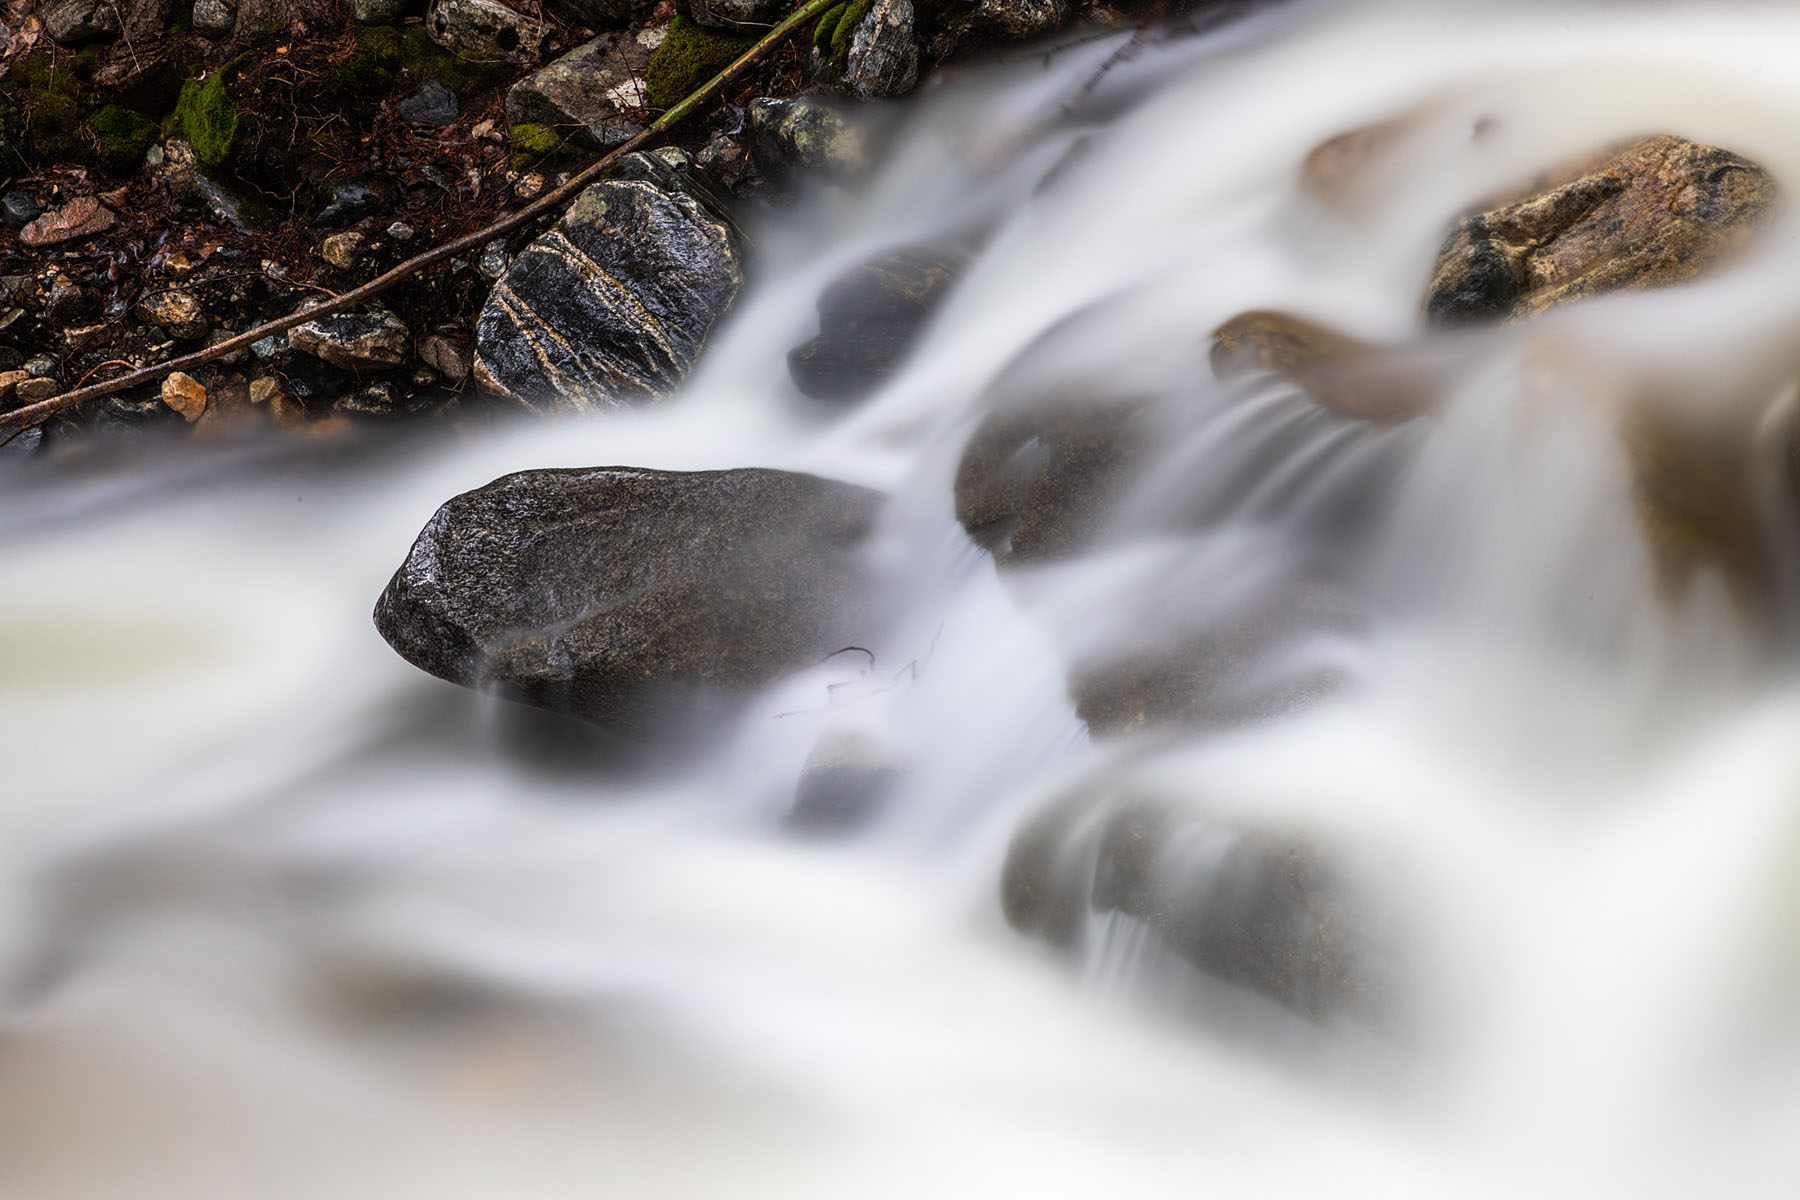 Snow Creek in the national forest,.  Stacked ND and polarizer filters, exposure 30 seconds.  Click for next photo.